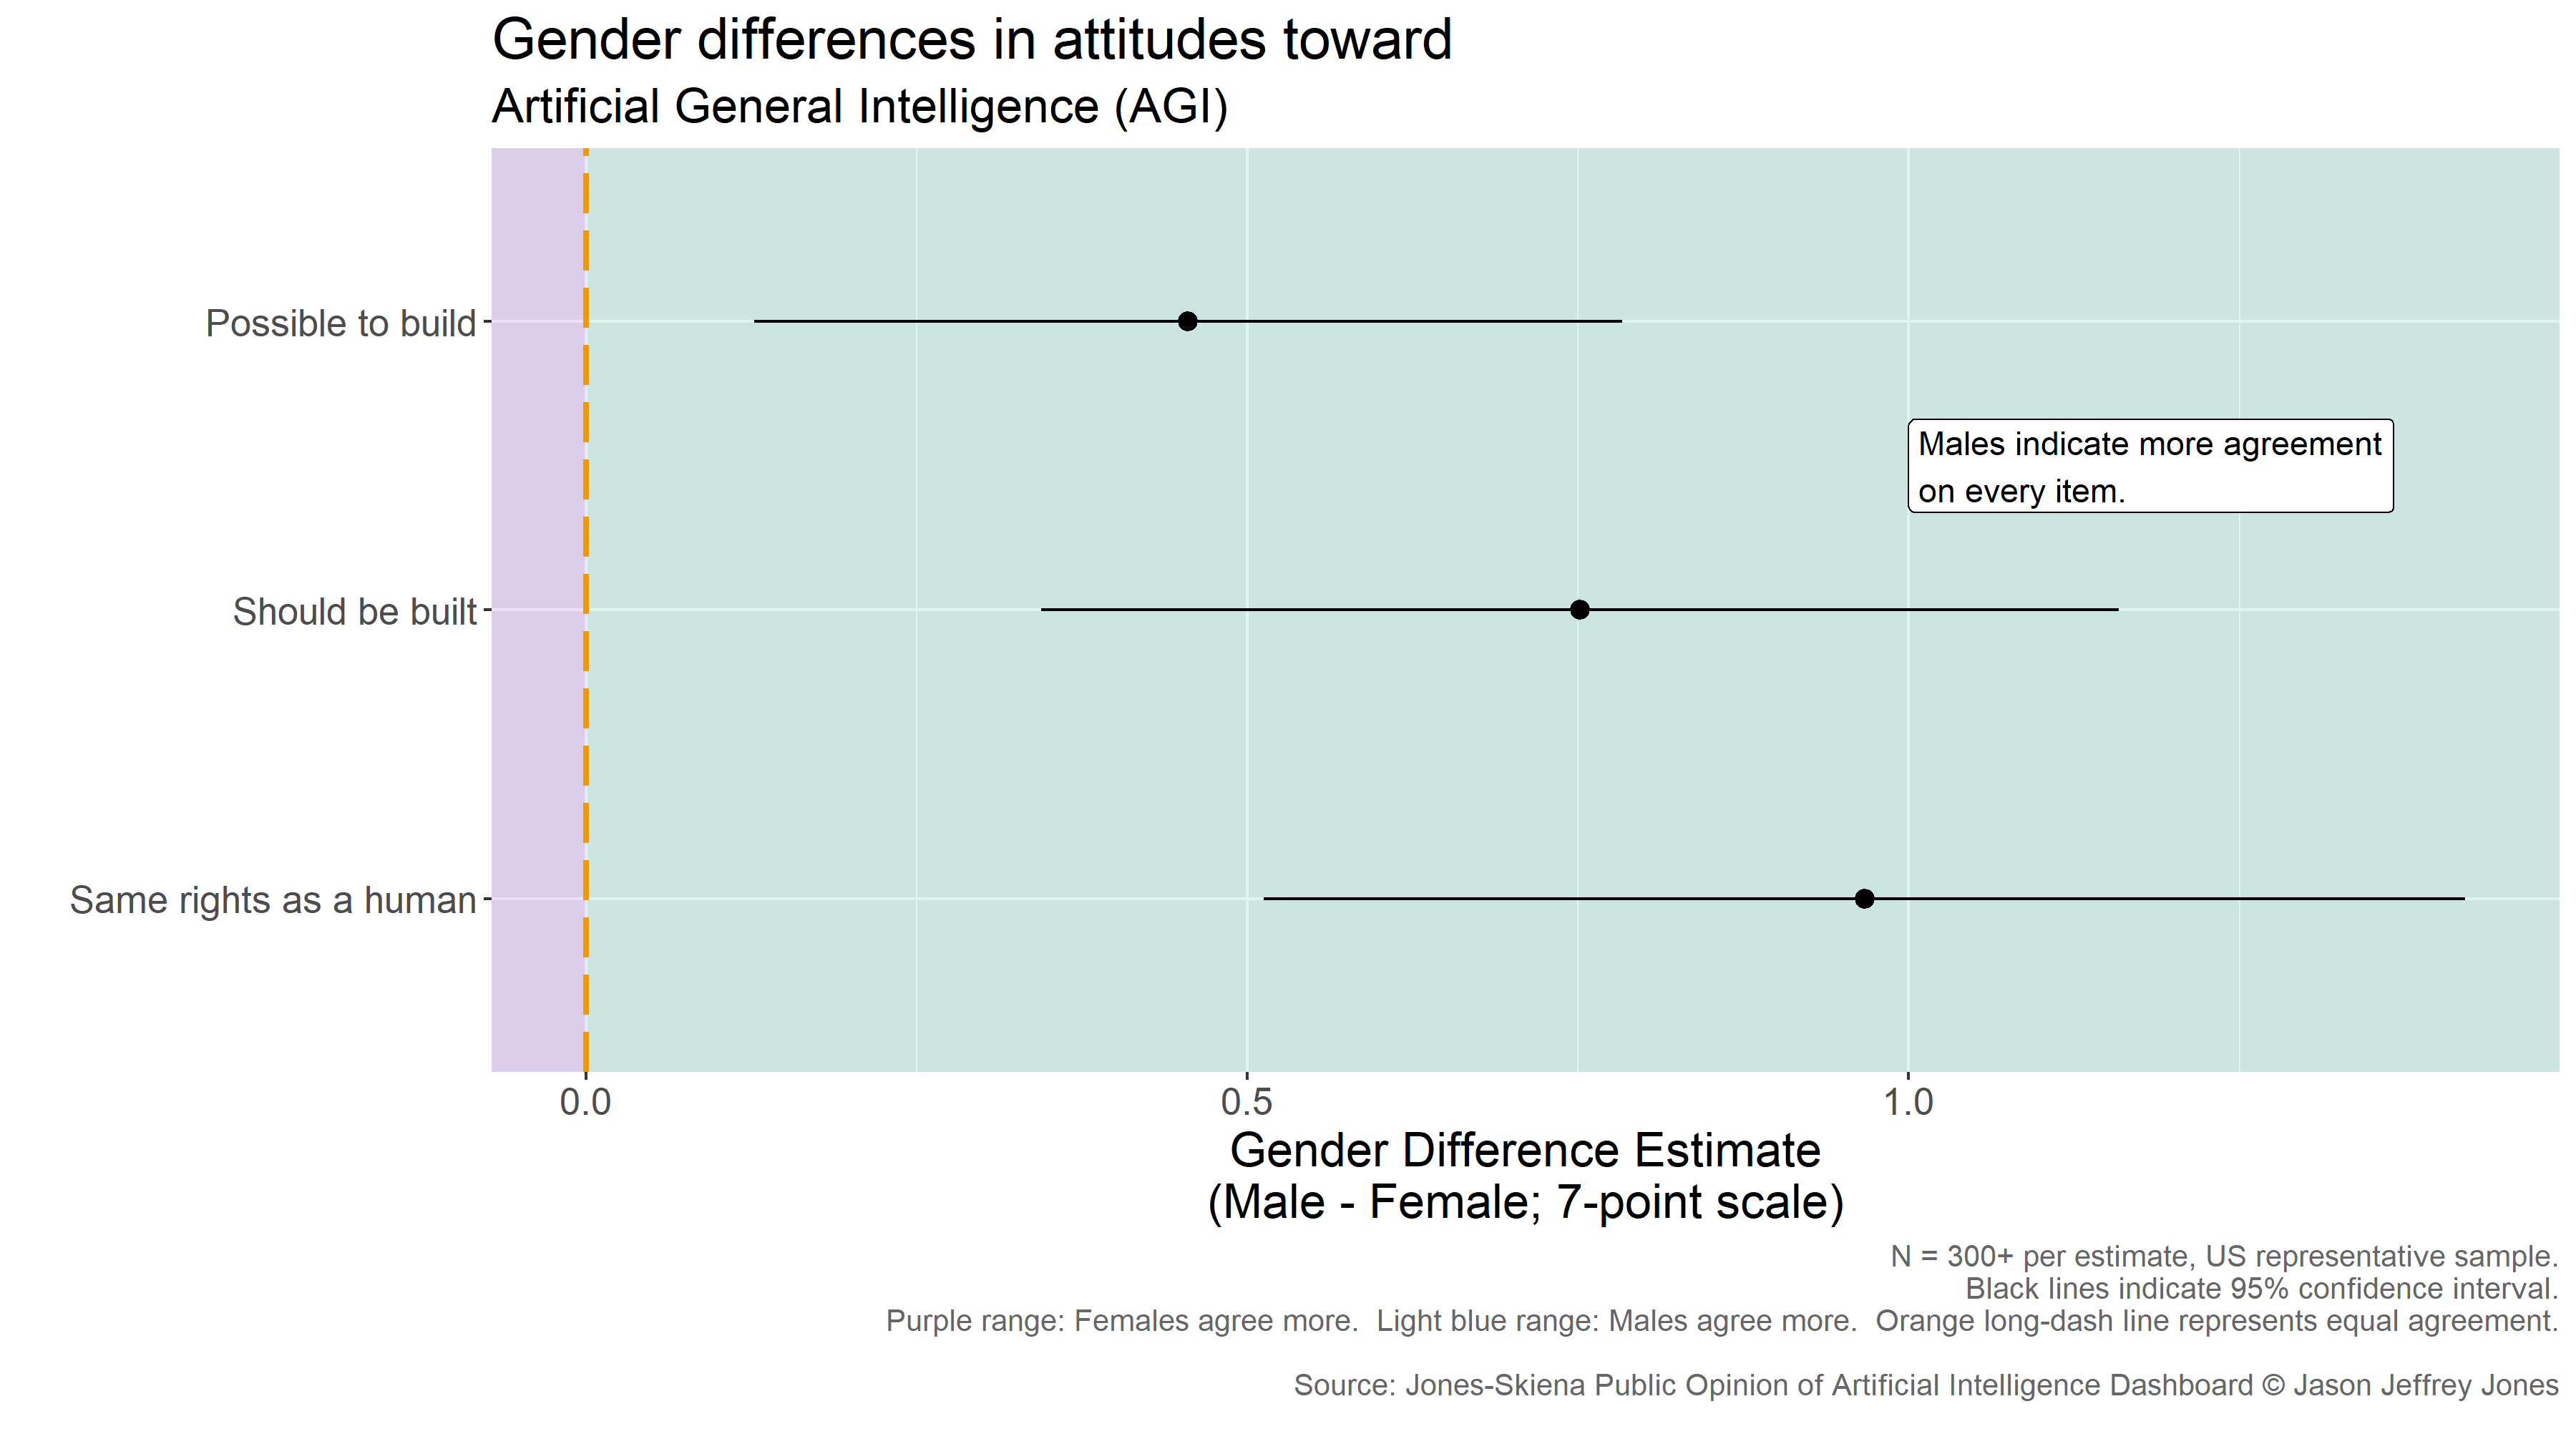 Figure for Gender Differences in Attitudes toward AGI